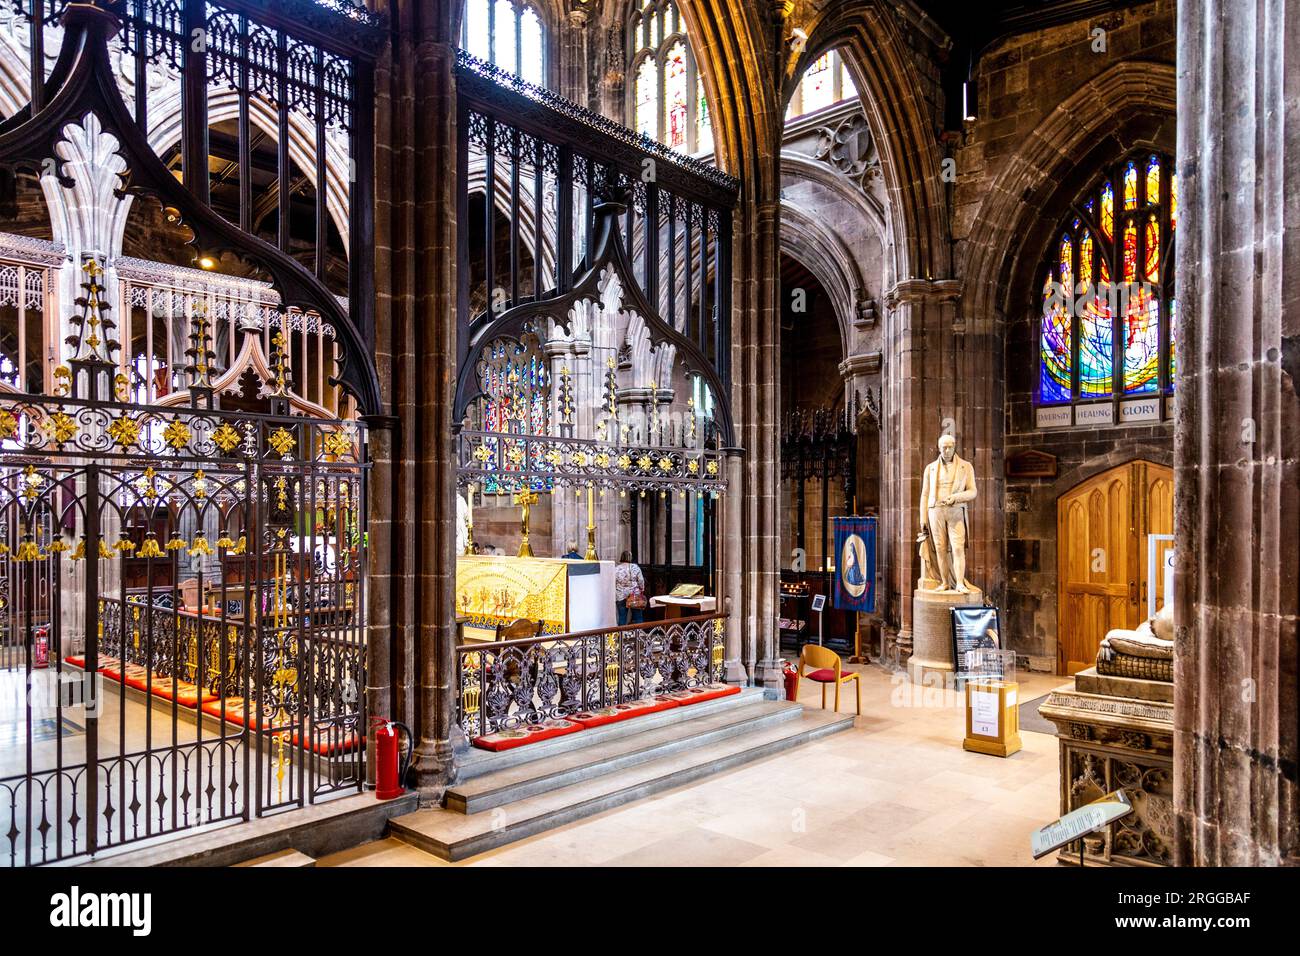 Alter Inside of Manchester Cathedral, Manchester, Lancashire, Angleterre Banque D'Images